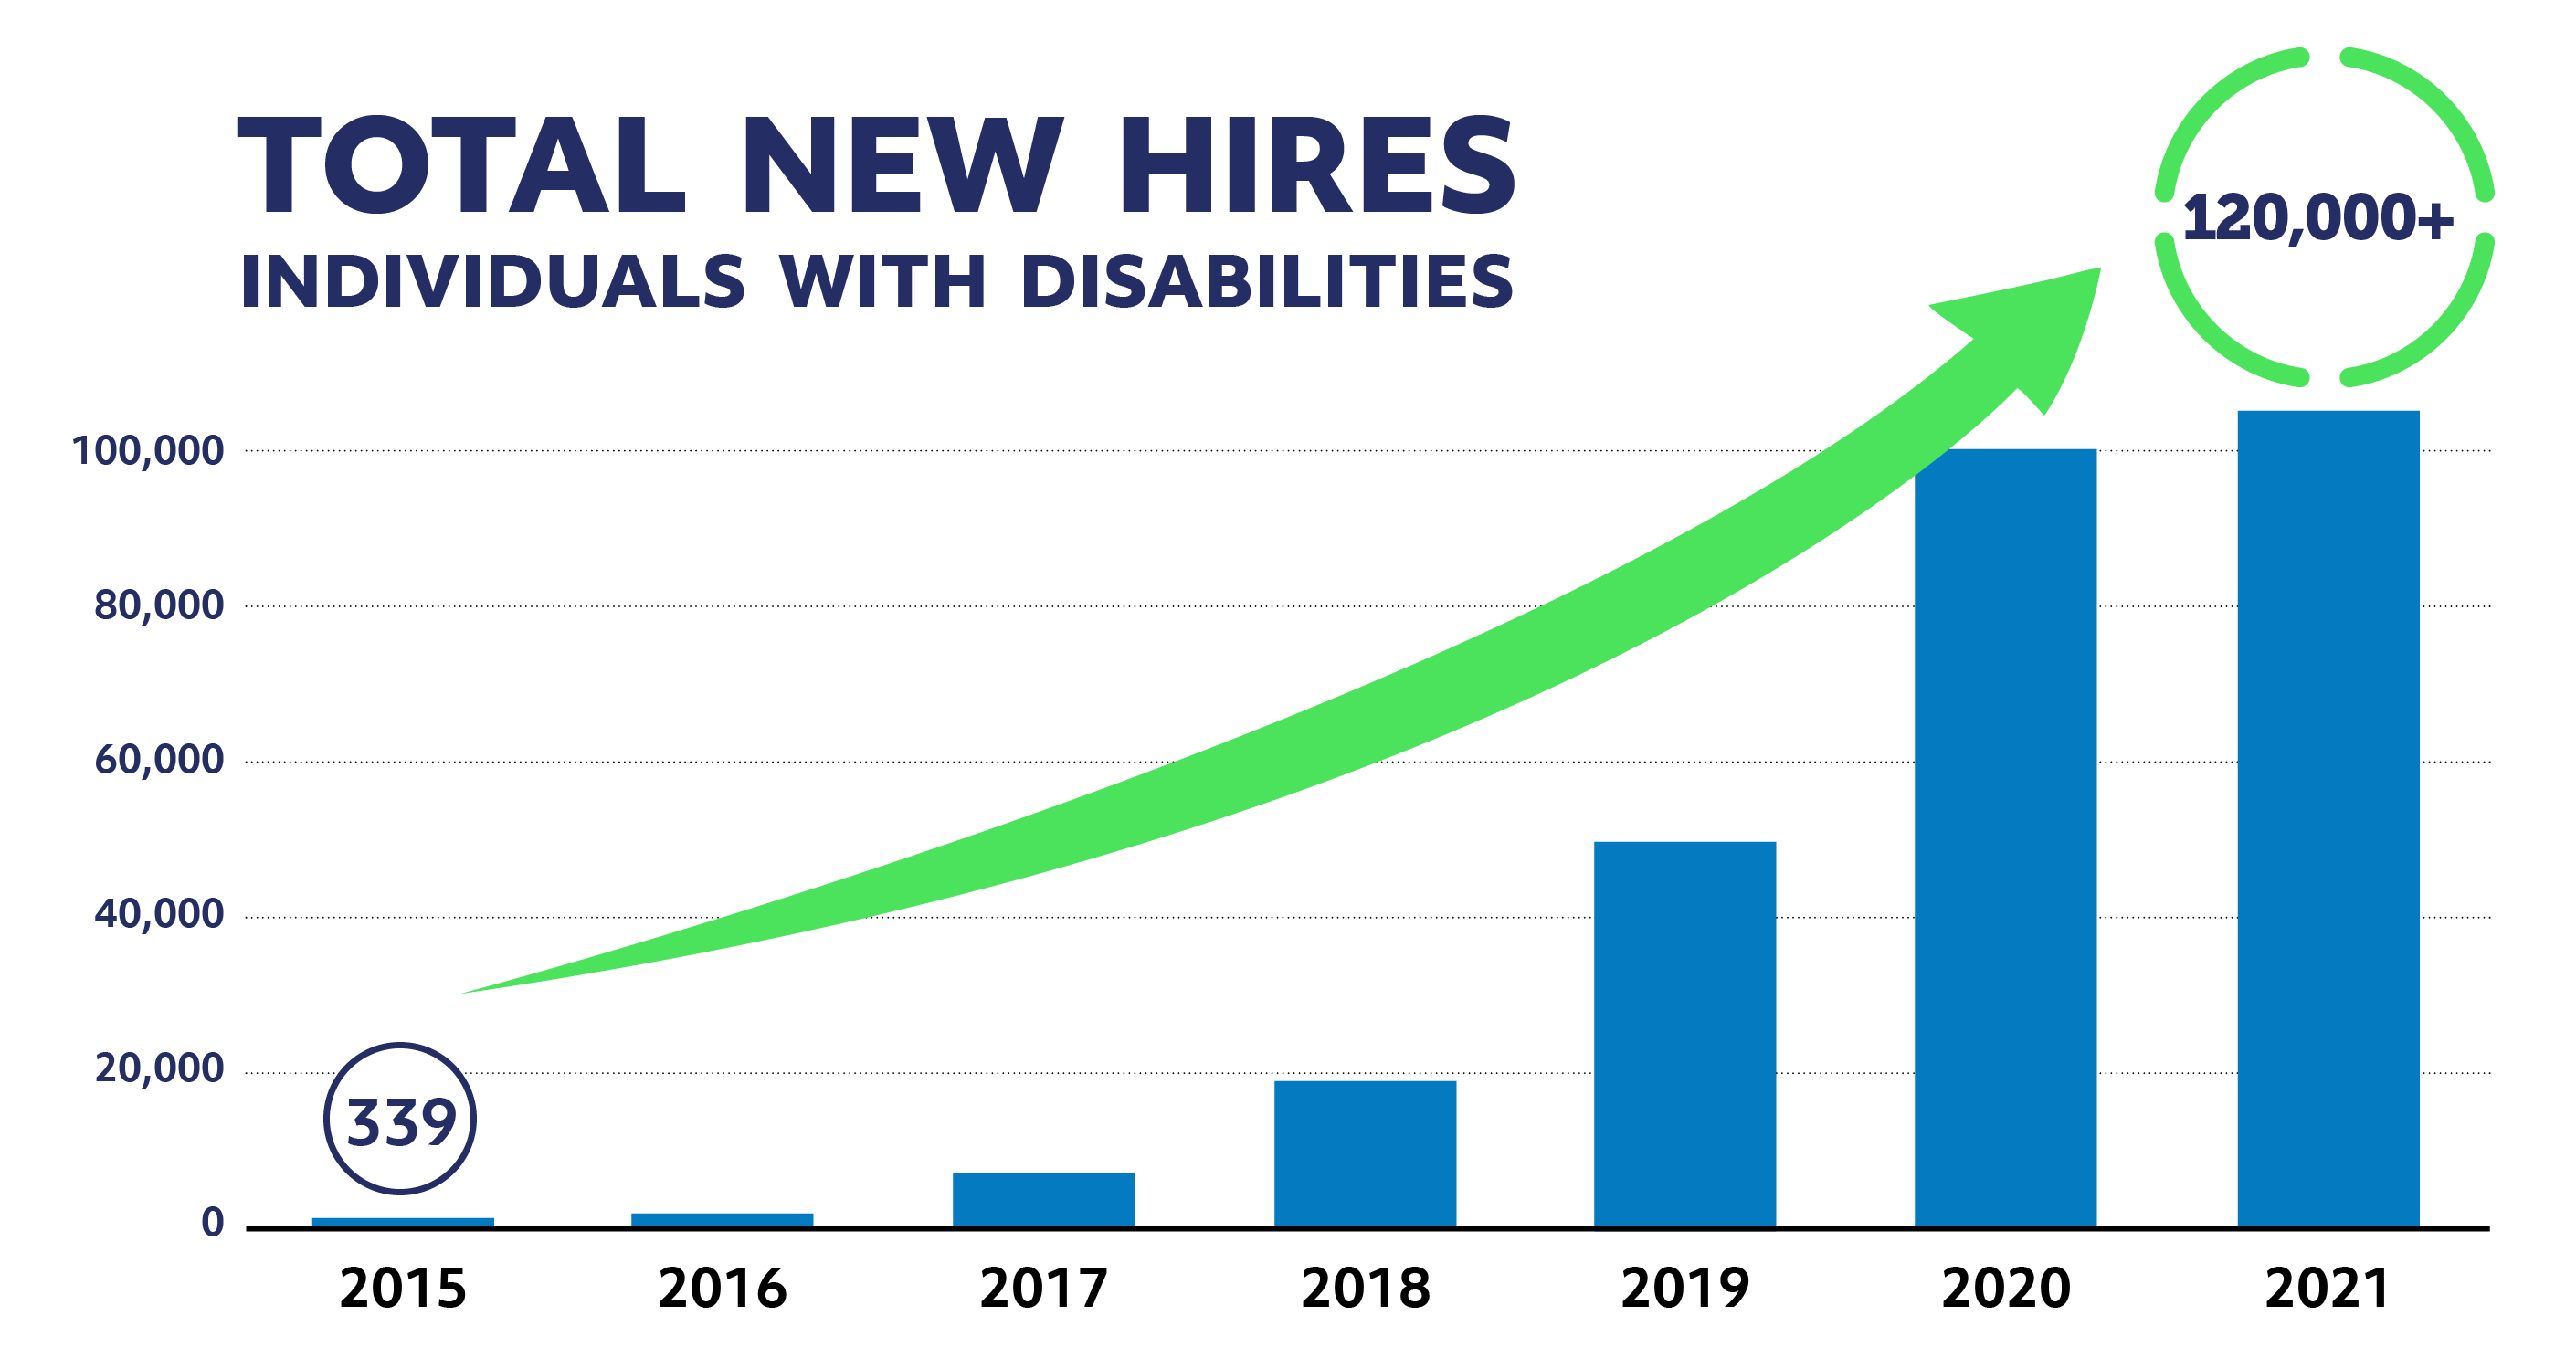 Chart shows total new hires of individuals with disabilities starting at 315 in 2015 to 120,000+ in 2021